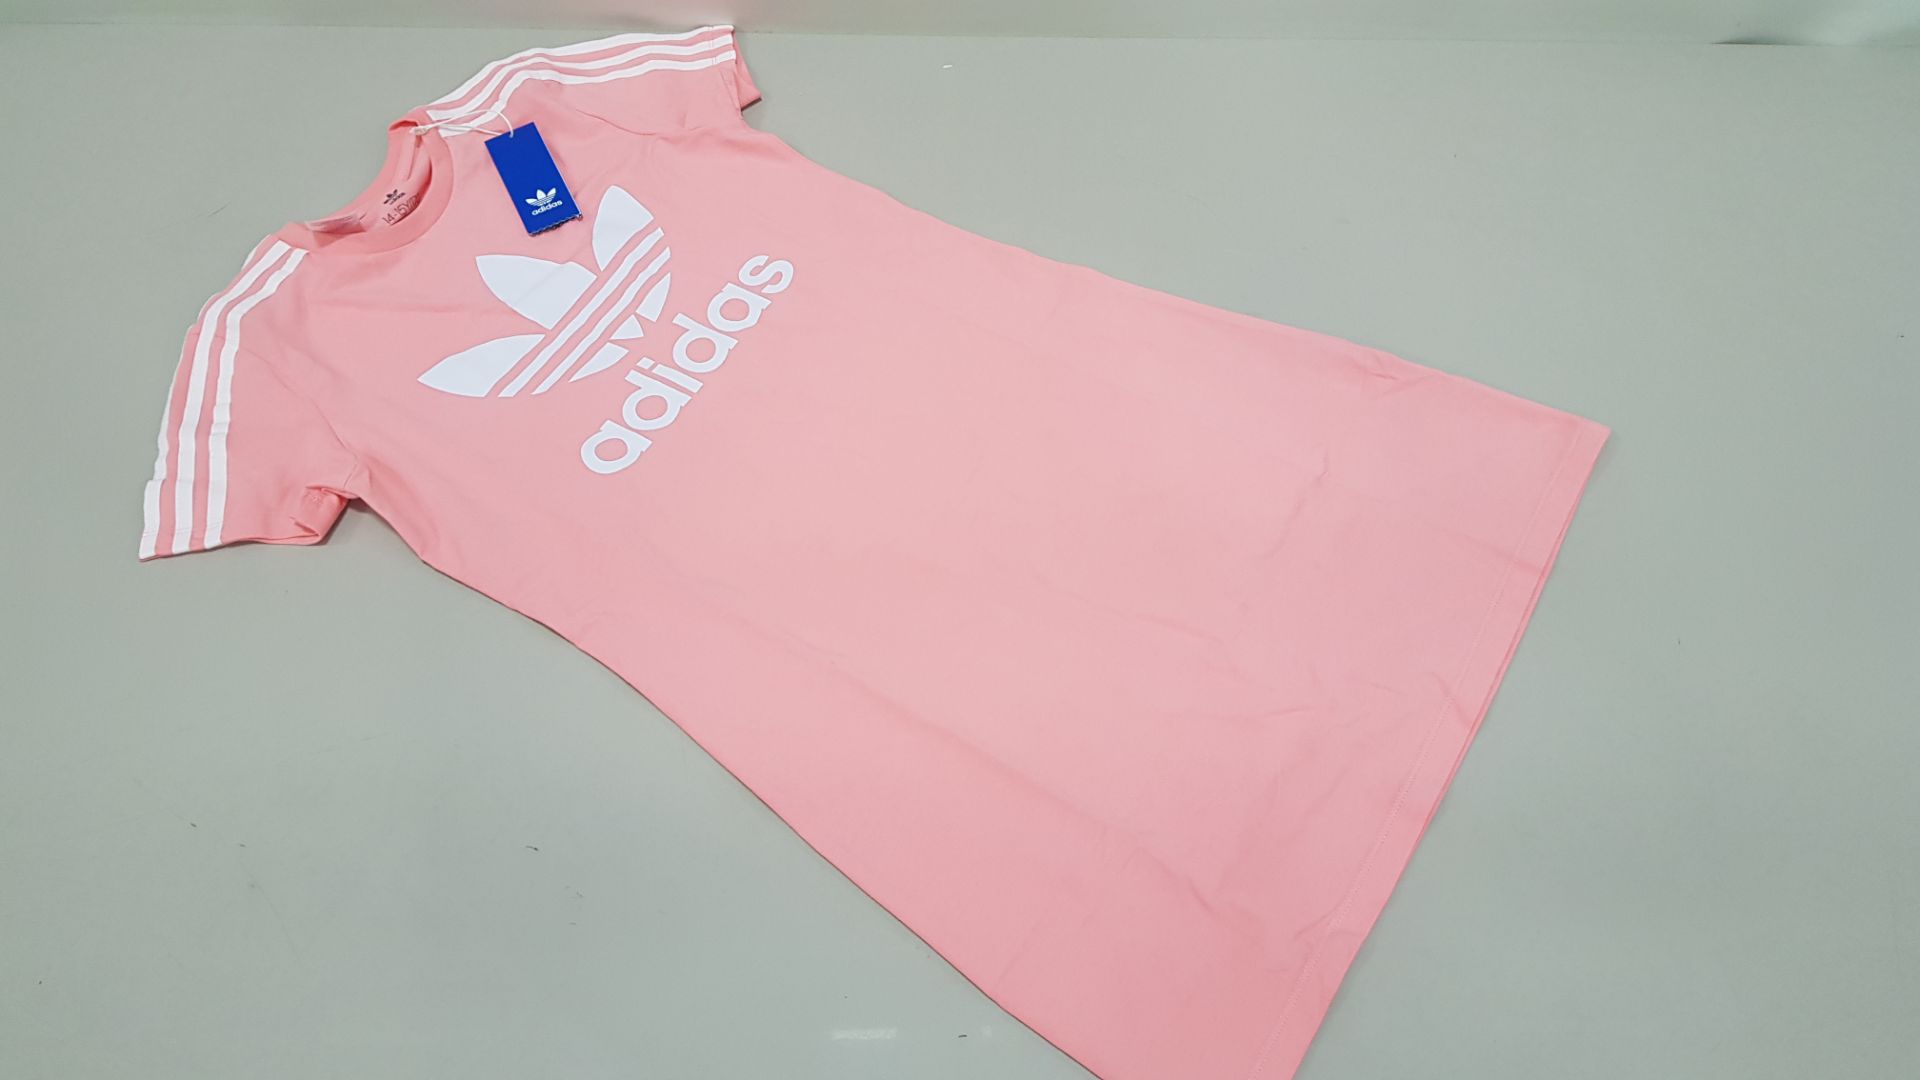 15 X BRAND NEW ADIDAS PINK SKATER DRESS ITEM CODE - A631 PD9TL AGE 13-14 YEARS